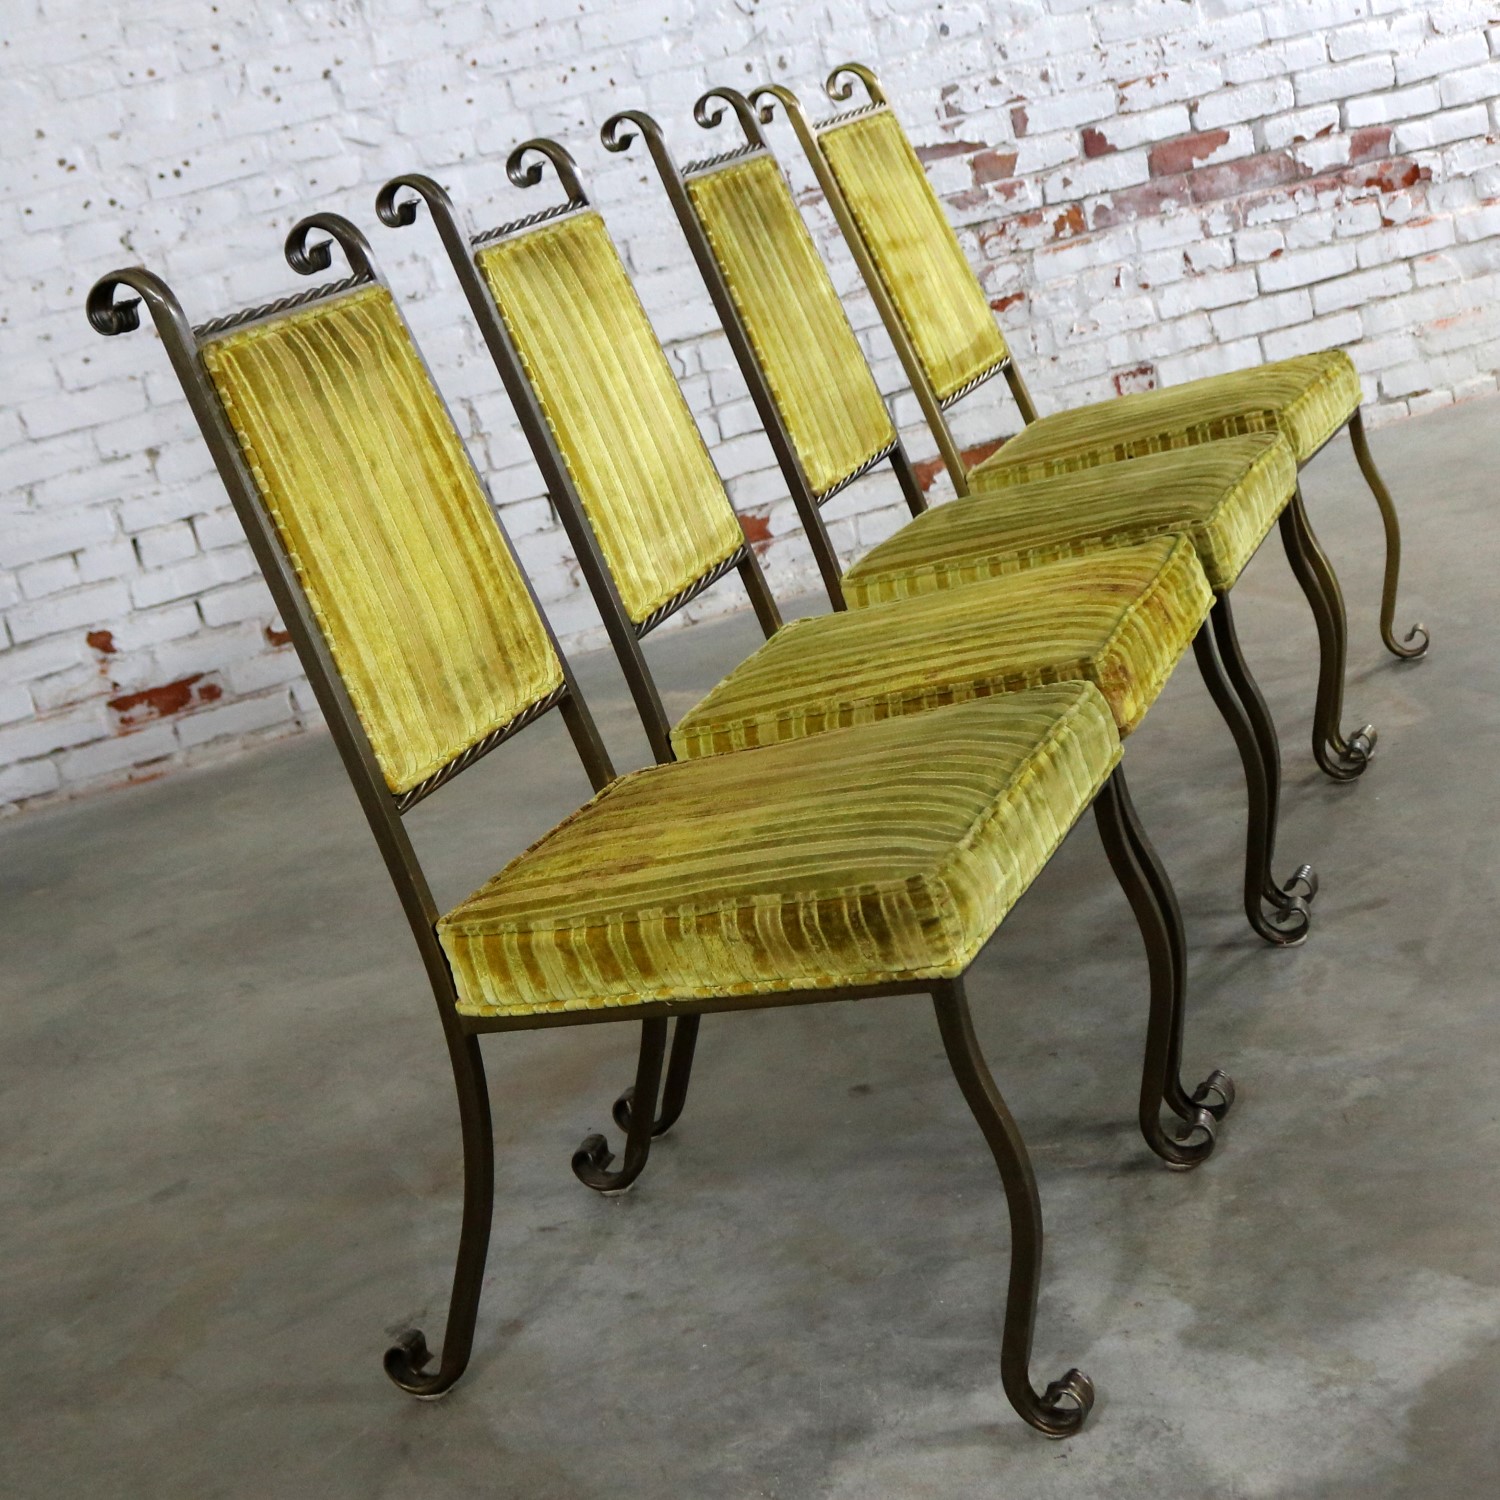 Four Hollywood Regency Wrought Iron Dining Chairs by Swirl Craft of Sun Valley